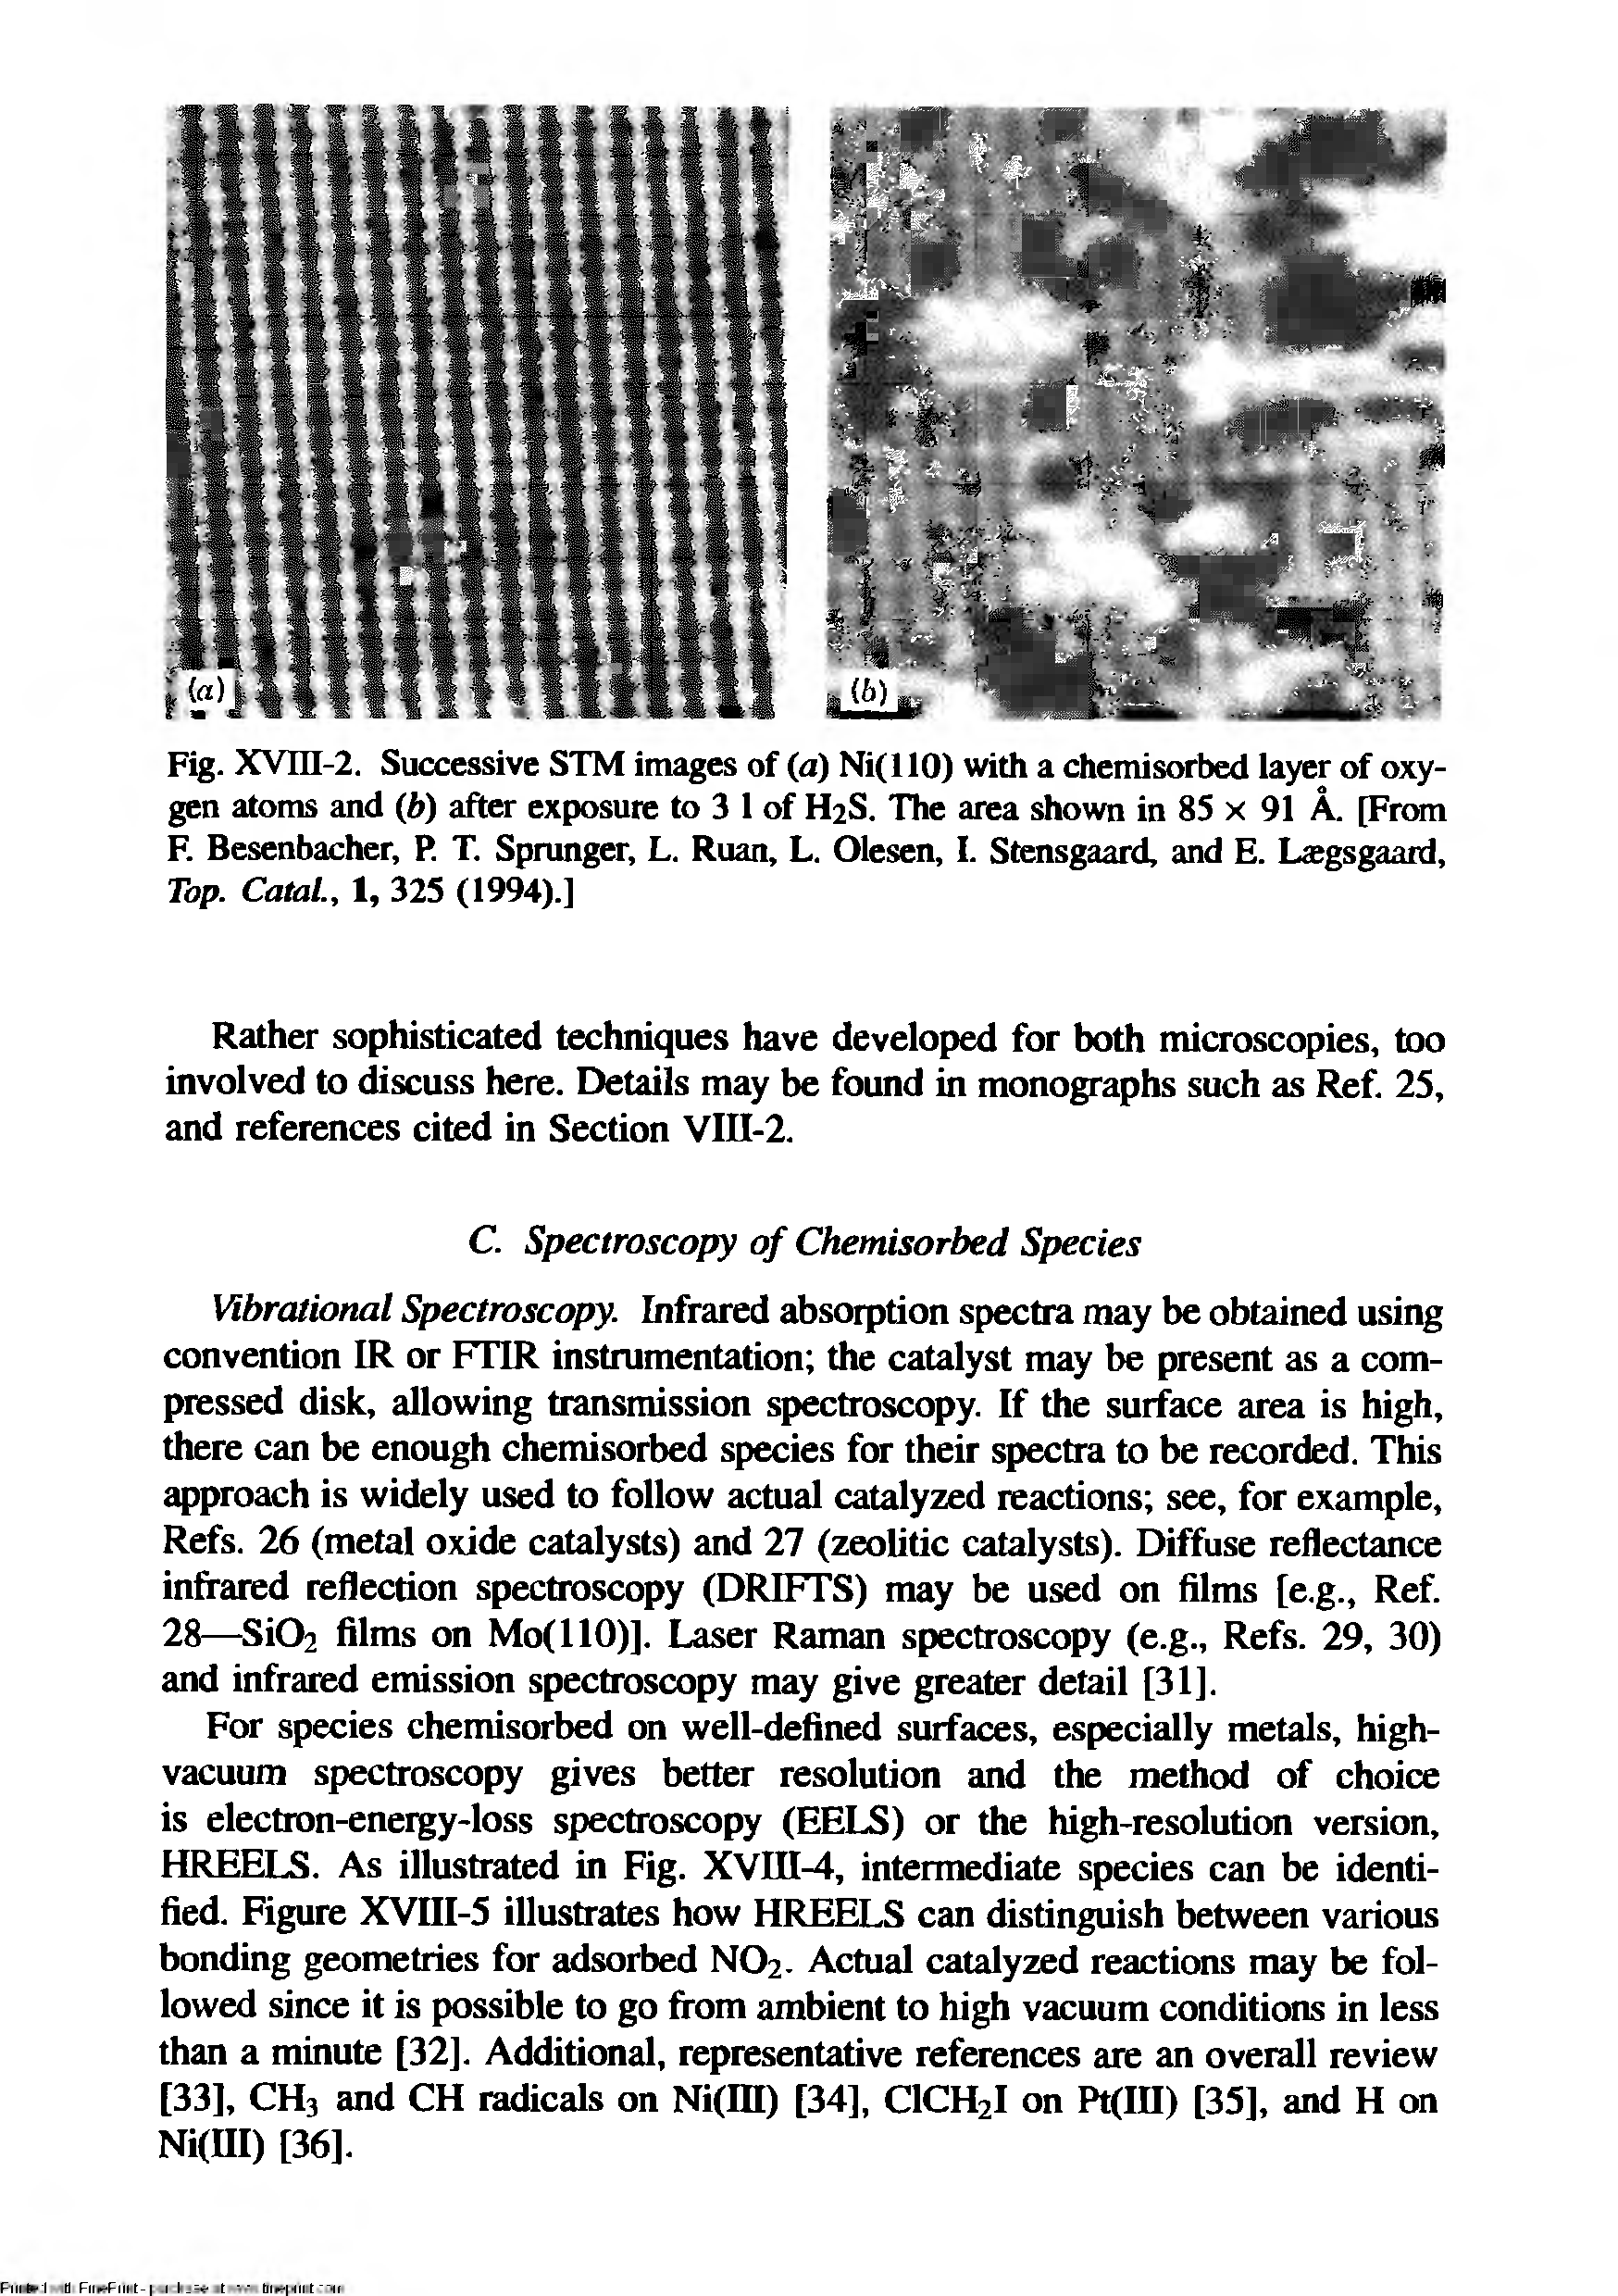 Fig. XVni-2. Successive STM images of (a) Ni(llO) with a chemisorbed layer of oxygen atoms and (b) after exposure to 3 1 of H2S. The area shown in 85 x 91 A. [From F. Besenbacher, P. T. Sprunger, L. Ruan, L. Olesen, I. Stensgaard, and E. Lcegsgaard, Tap. Catal., 1, 325 (1994).]...